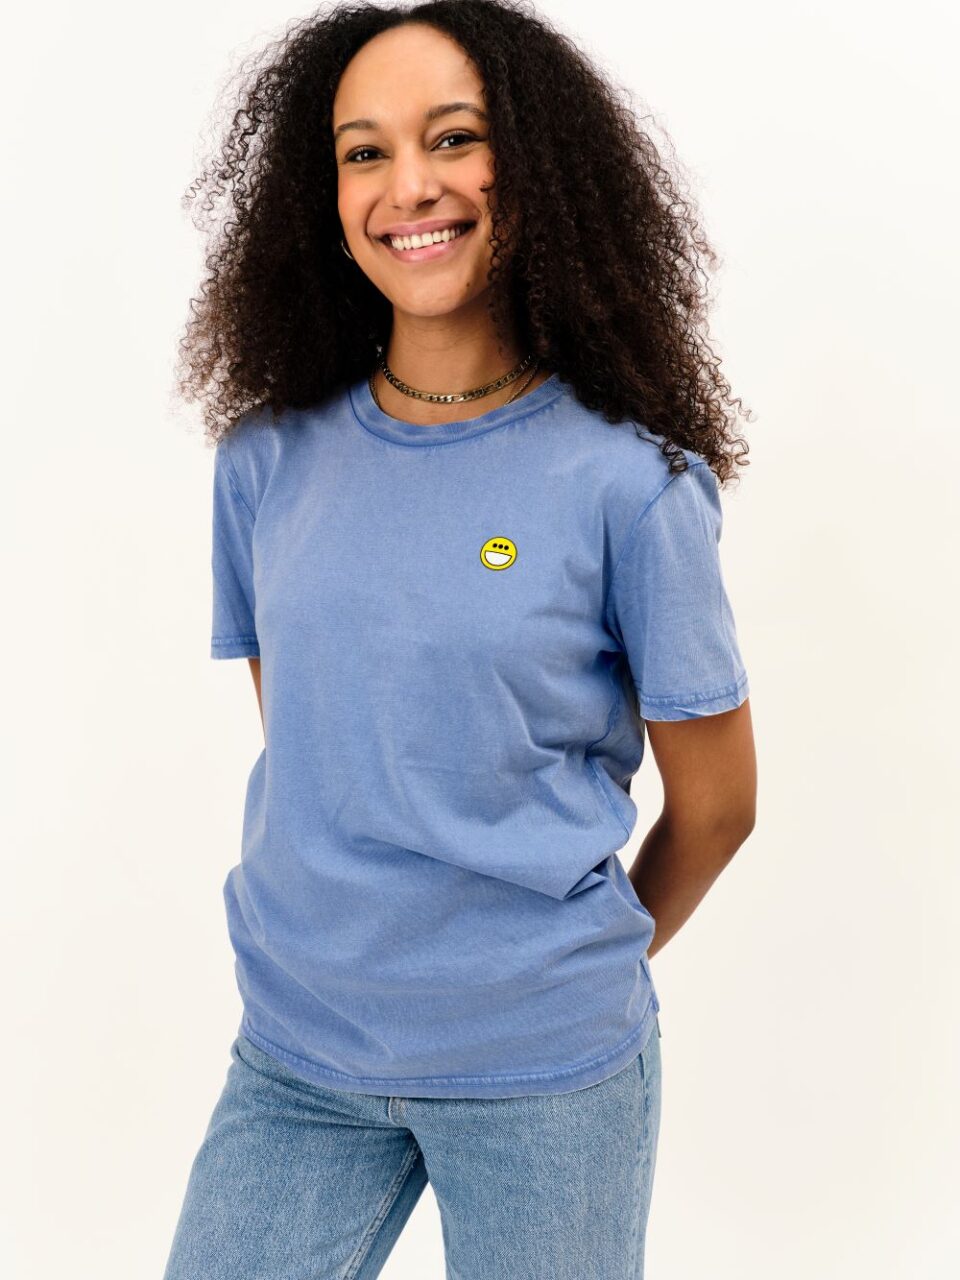 Washed Blue-Smiley-T-shirt-STROM Clothing-1